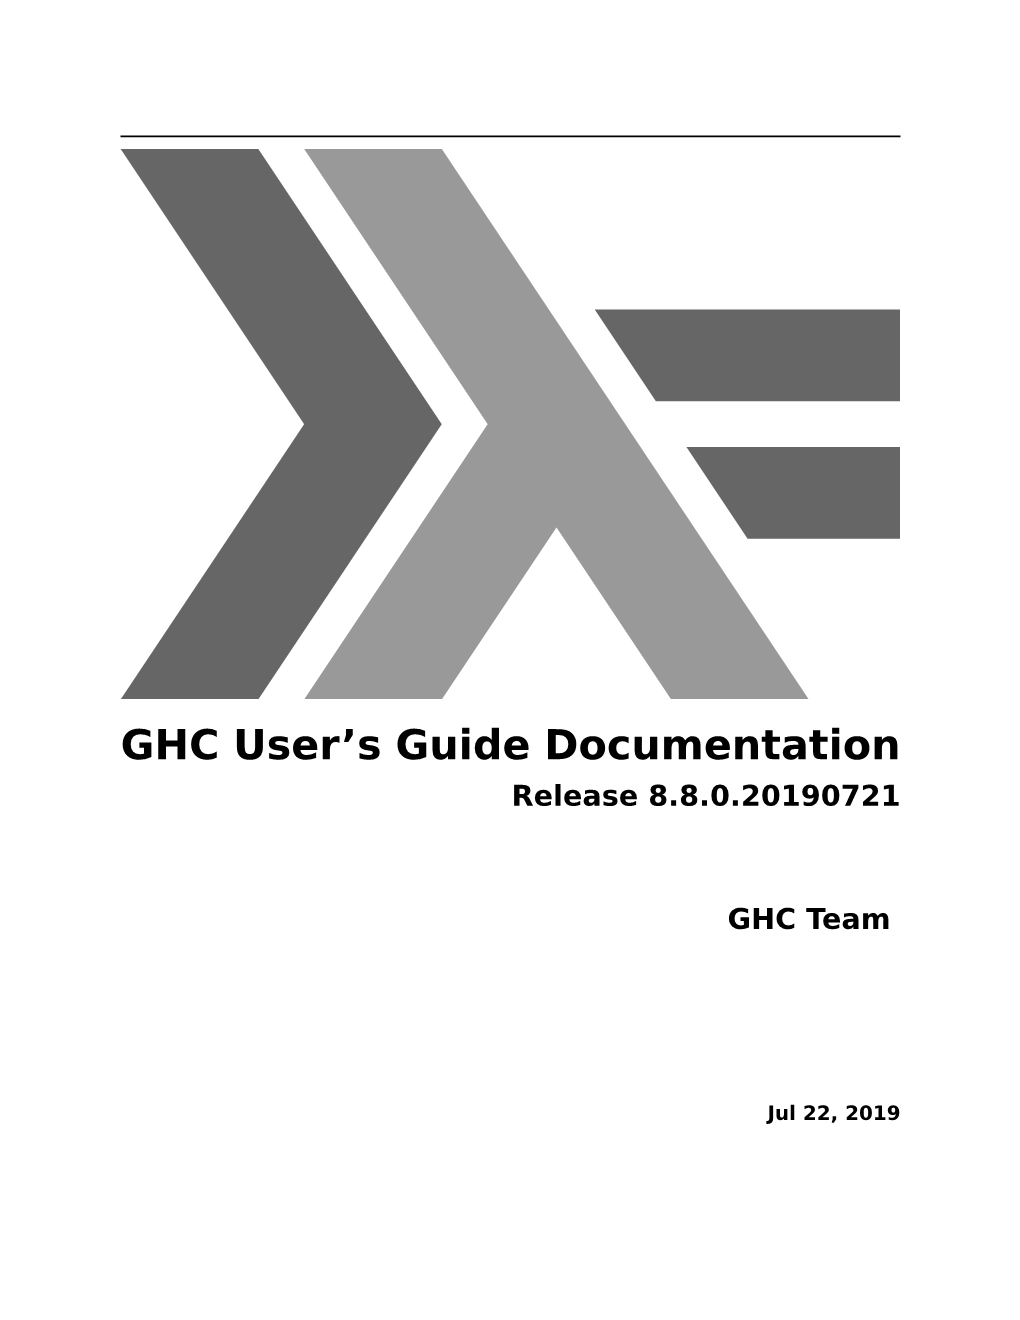 GHC User's Guide Documentation